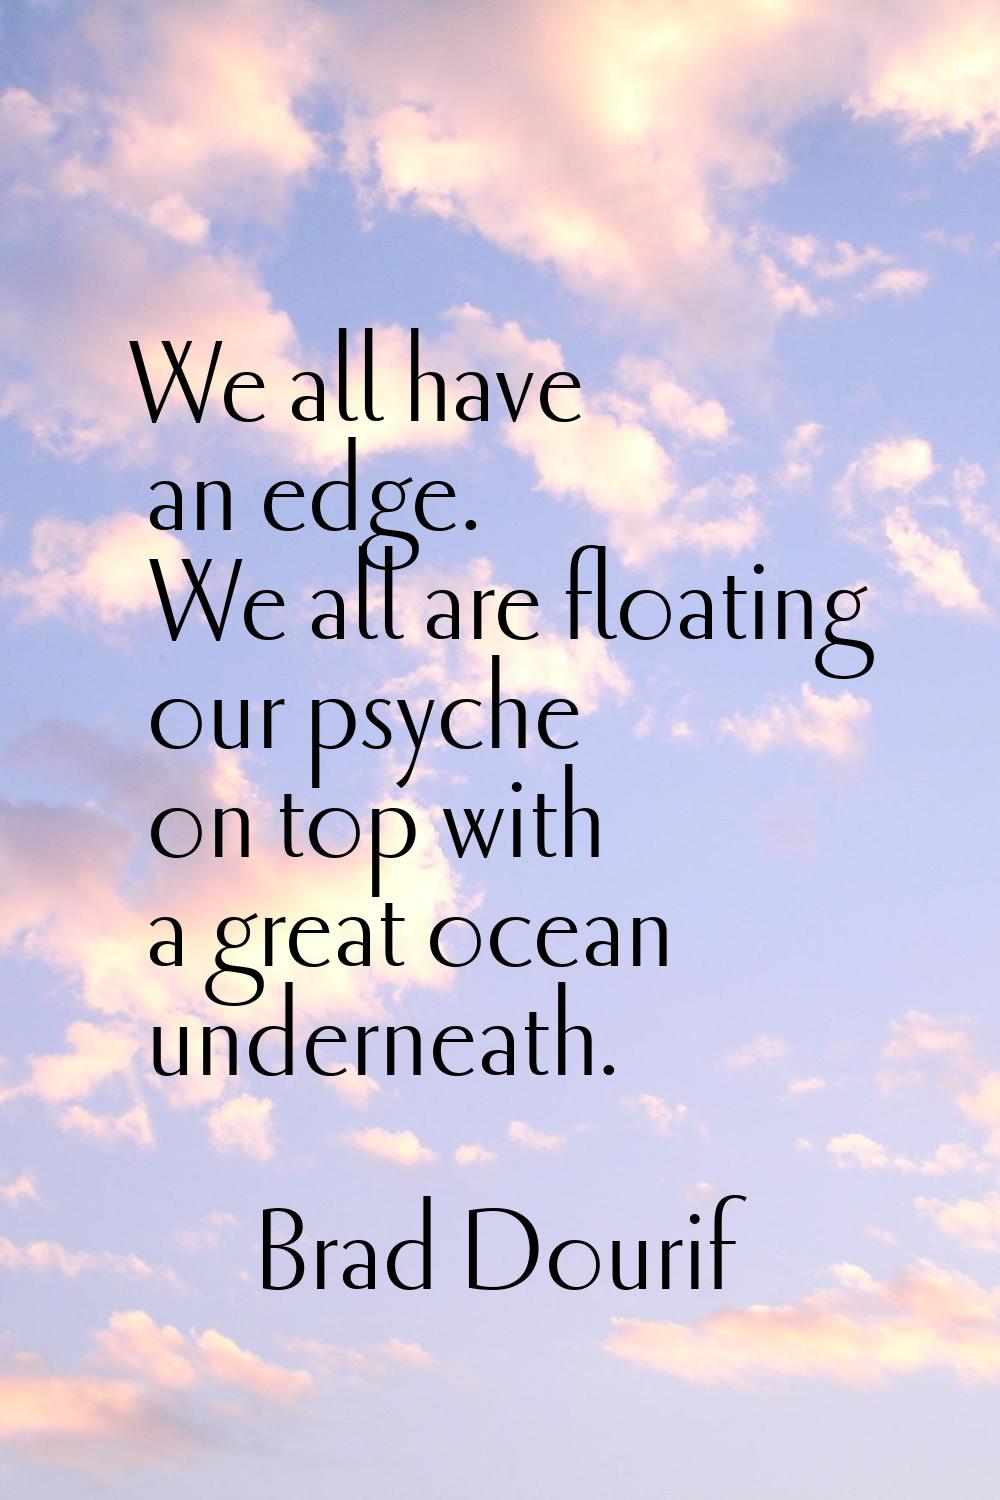 We all have an edge. We all are floating our psyche on top with a great ocean underneath.